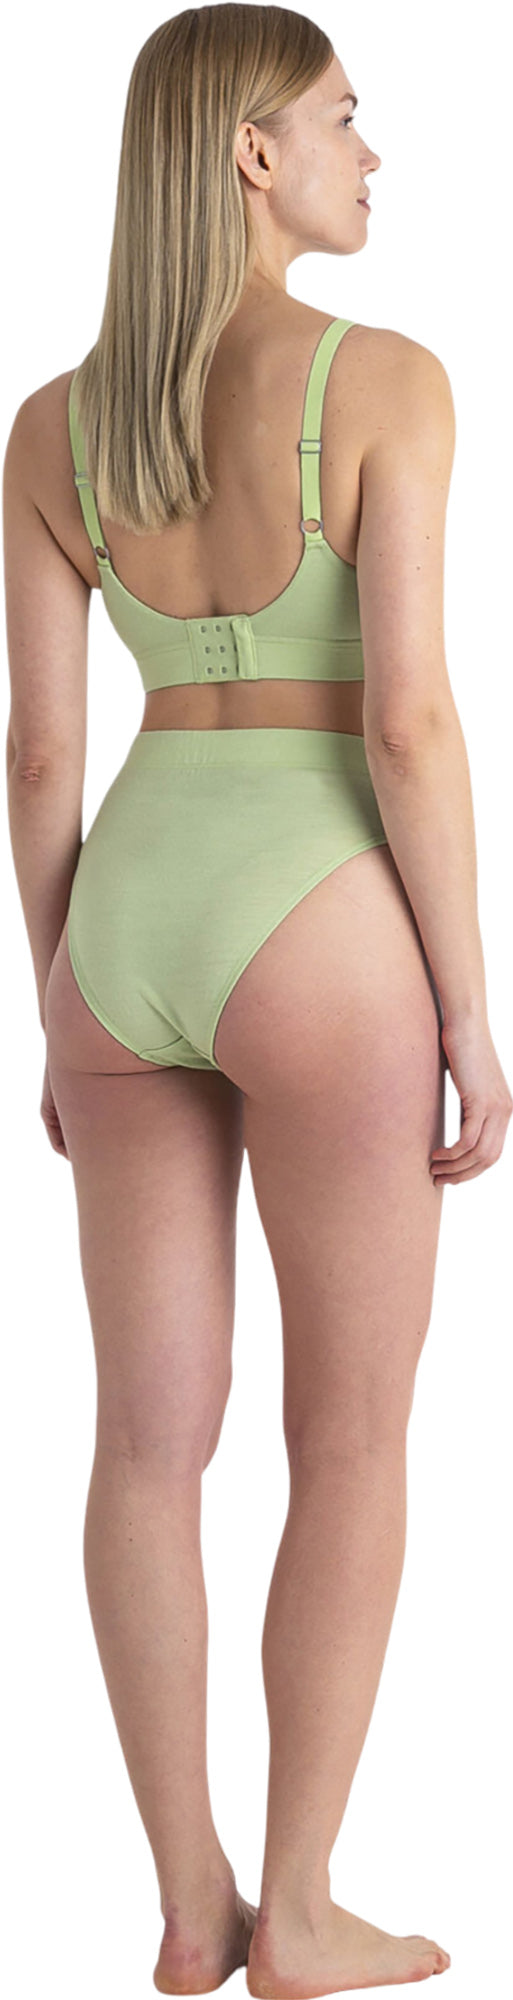 Icebreaker Merino Sprite Hot Pants Underwear for Women, Merino Wool Base  Layer - Lightweight, Soft Women's Panties for Cold Weather Activities - Thermal  Underwear, Sage, Small at  Women's Clothing store